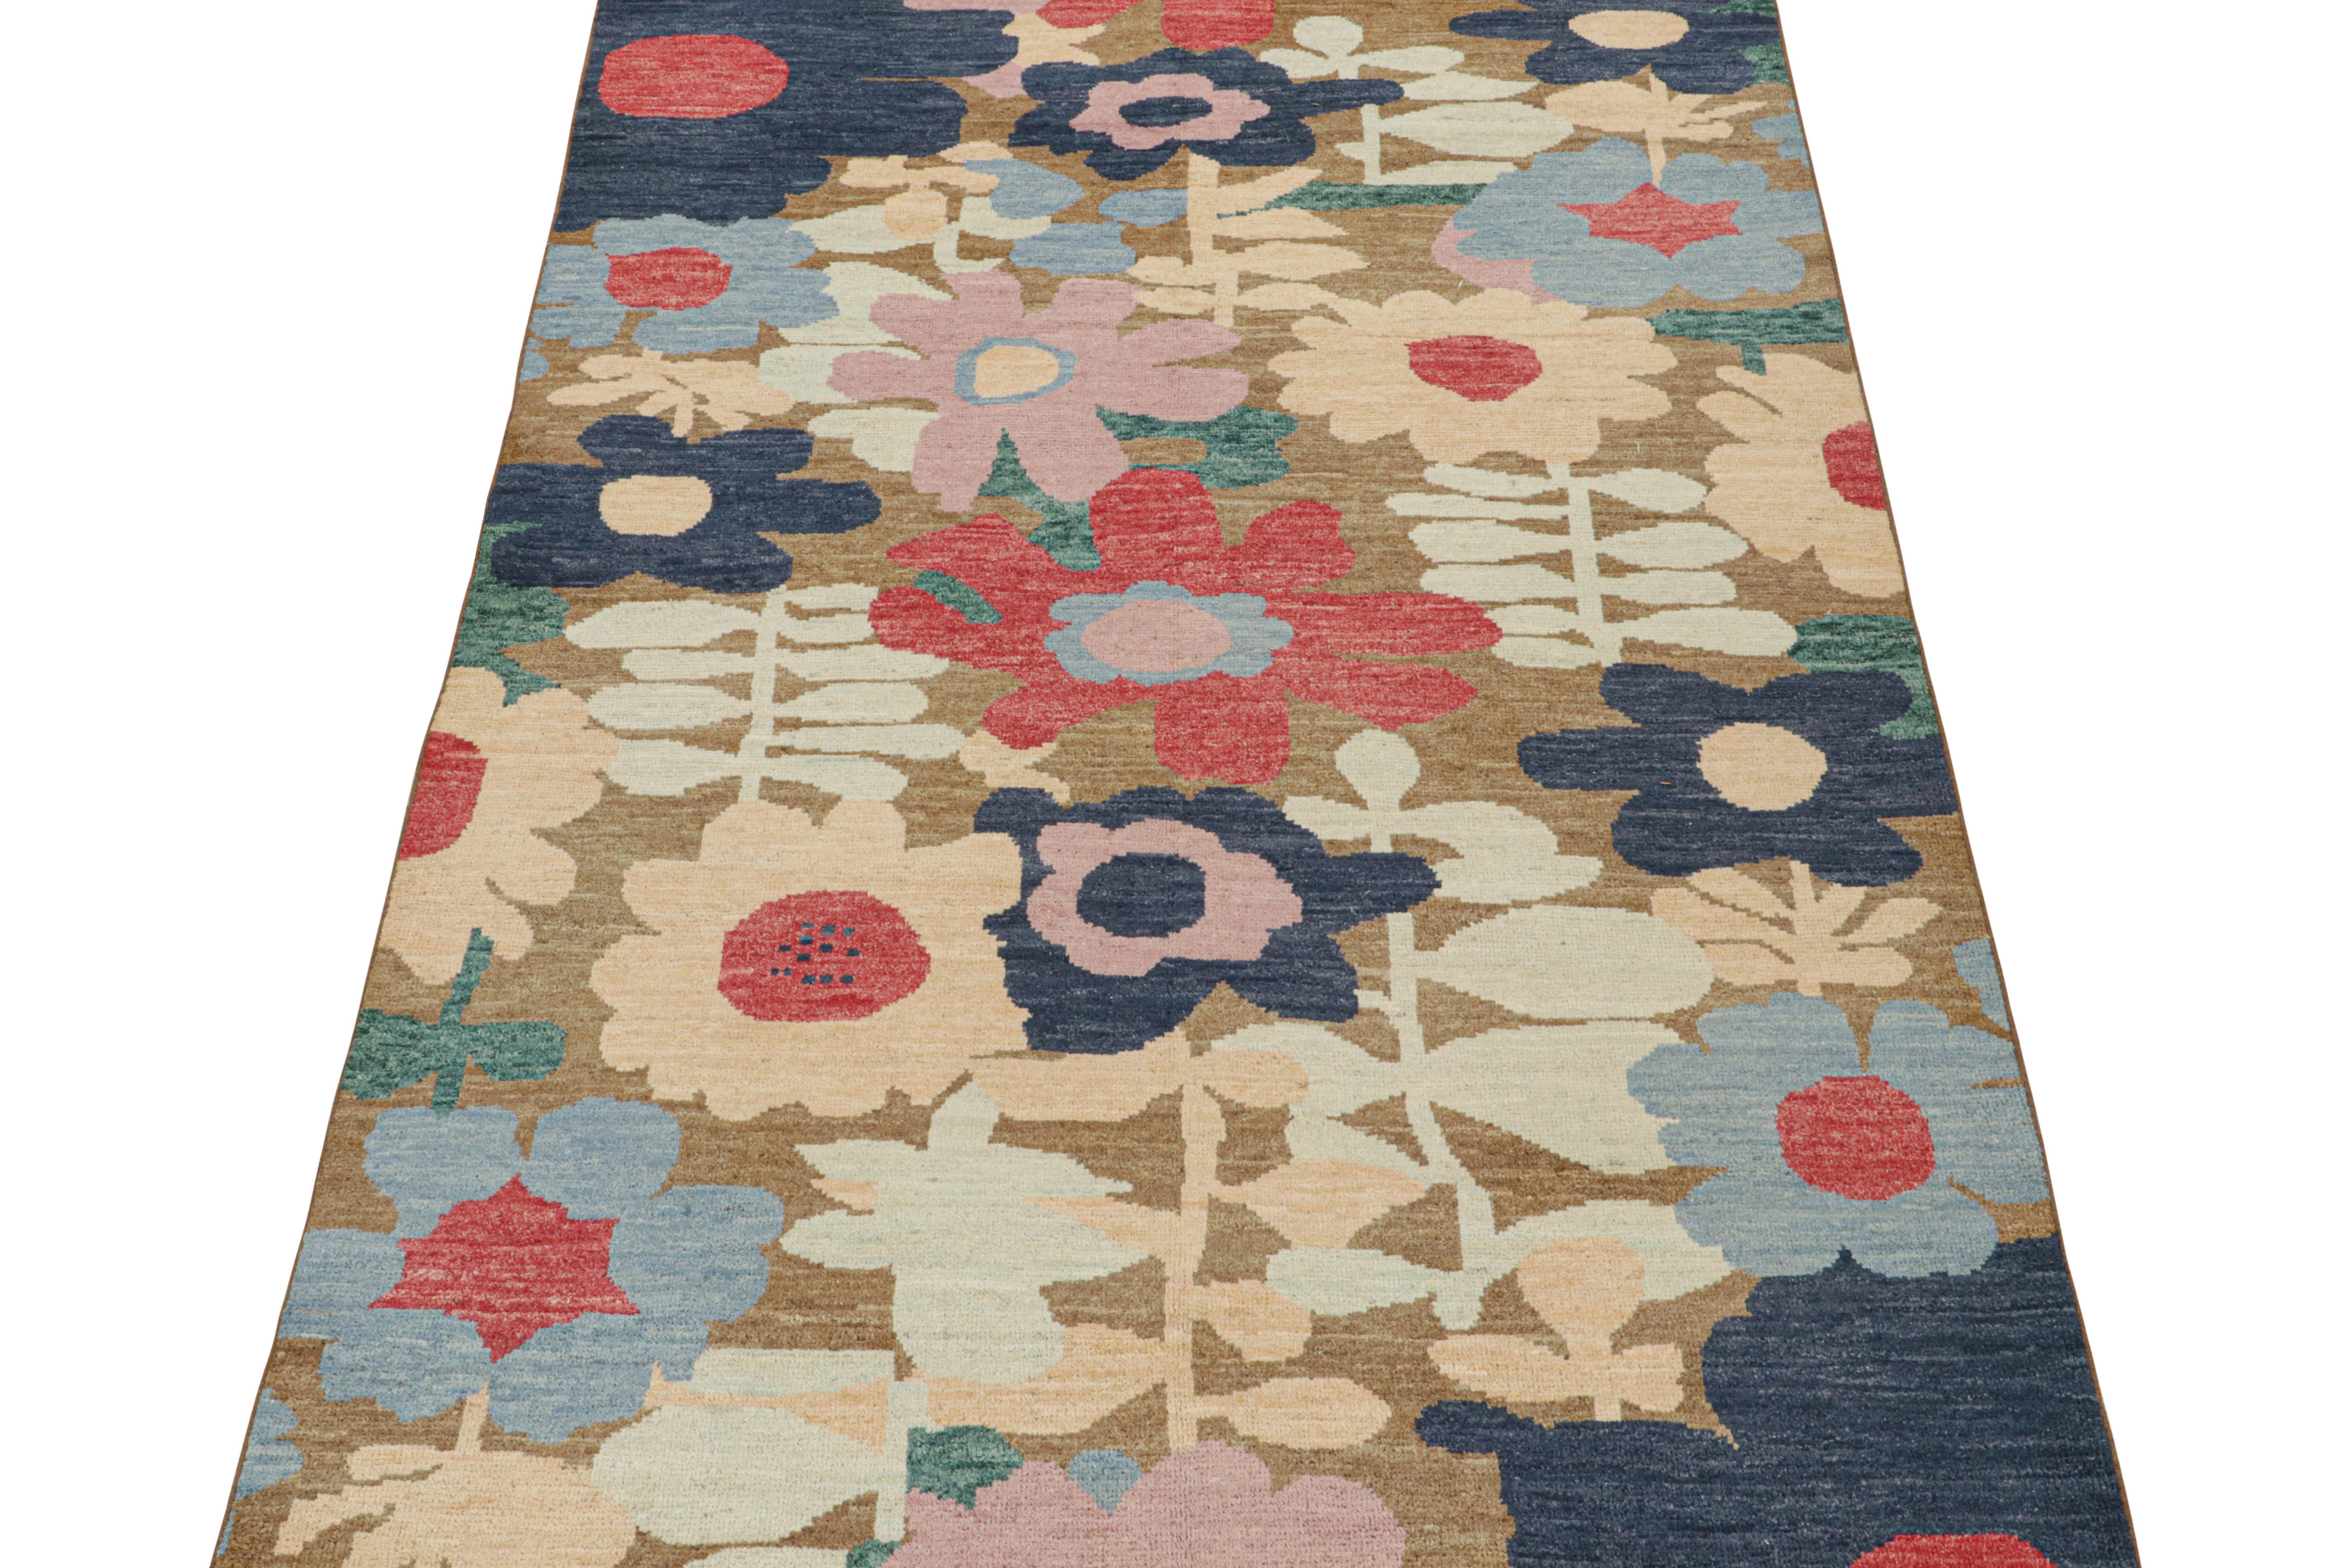 This contemporary 6x10 rug is an exciting new addition to Rug & Kilim’s Modern rug collection. Hand-knotted in wool, its design is a bold abstract take on botanical designs.

This particular design uses polychromatic colors in an all-over floral